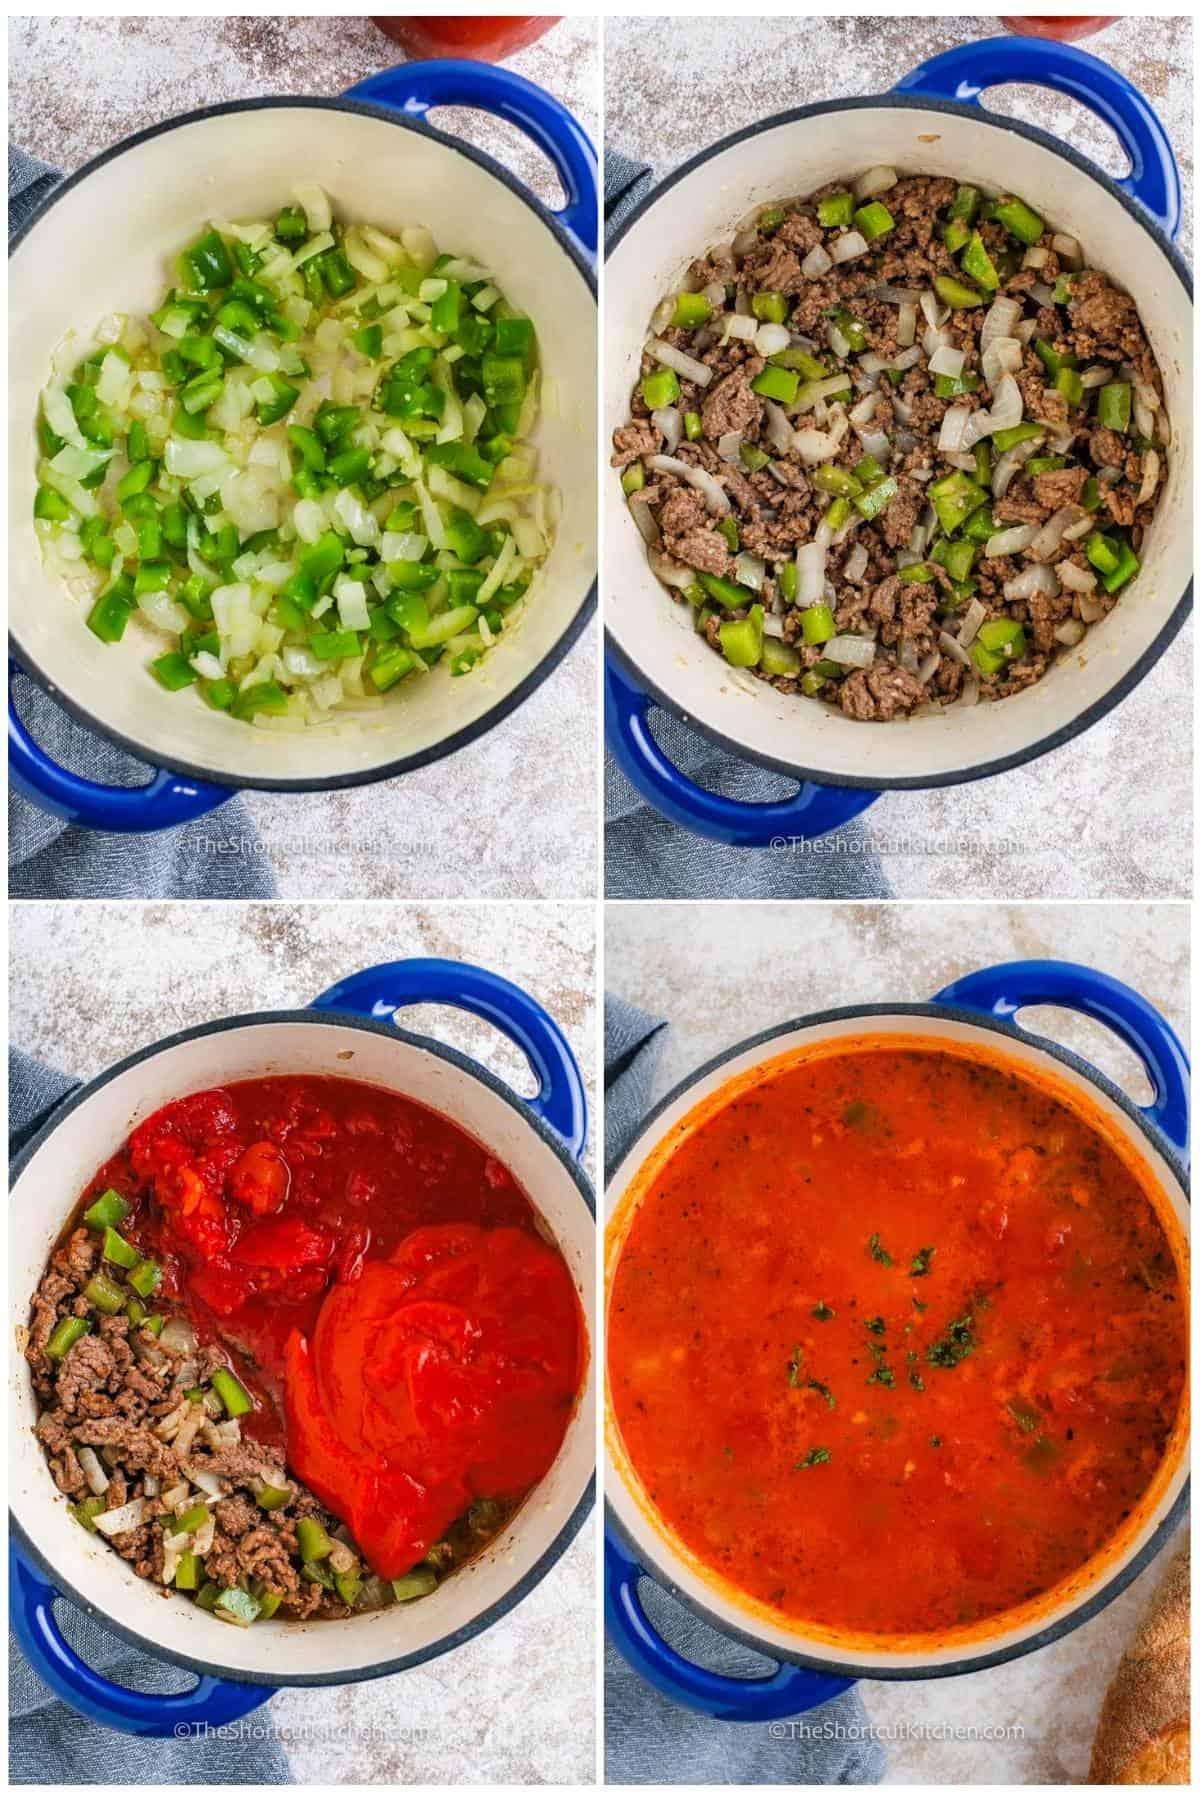 process of adding ingredients together to make Beef and Tomato Macaroni Soup